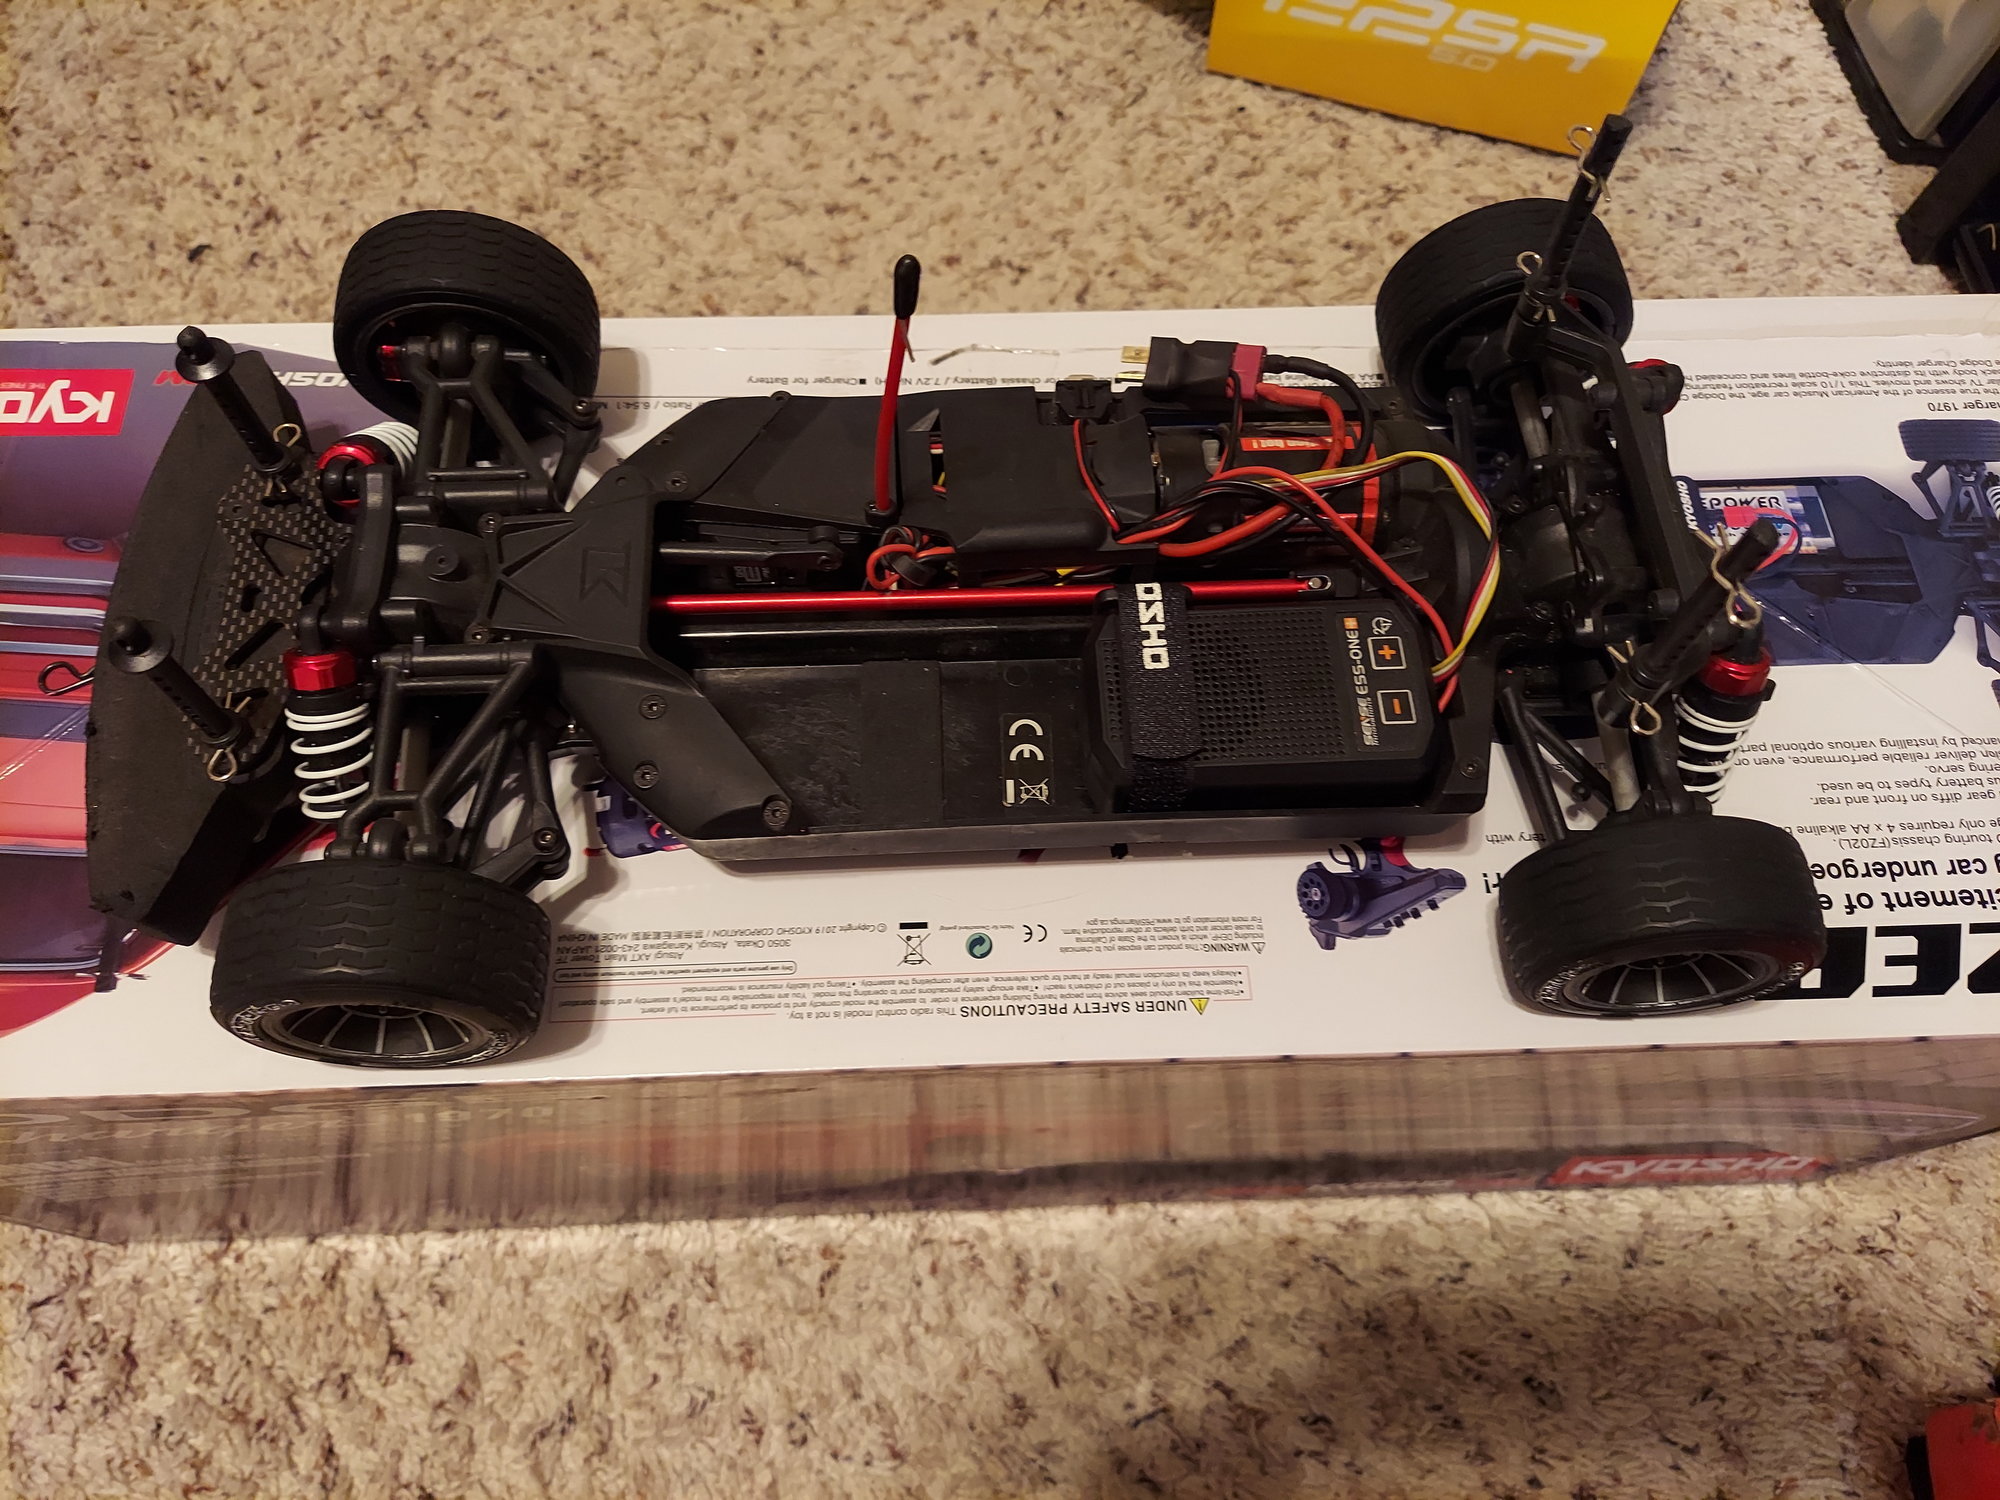 Kyosho General Lee for sale - R/C Tech Forums